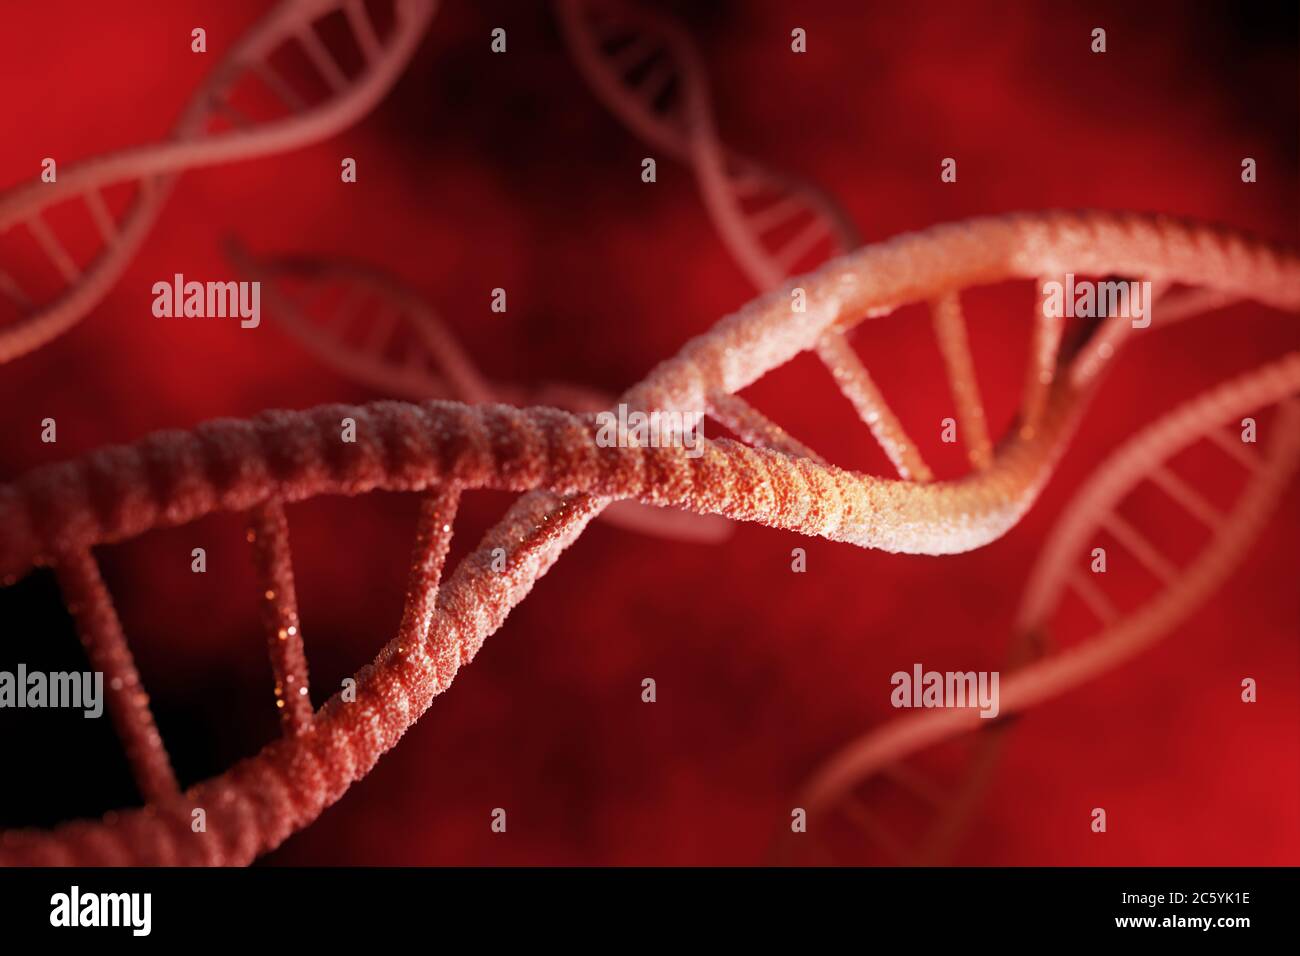 Red particles of dna strucrure glowing over dark red background. Genetic and medicine concept. 3d rendering. High quality 3d illustration Stock Photo